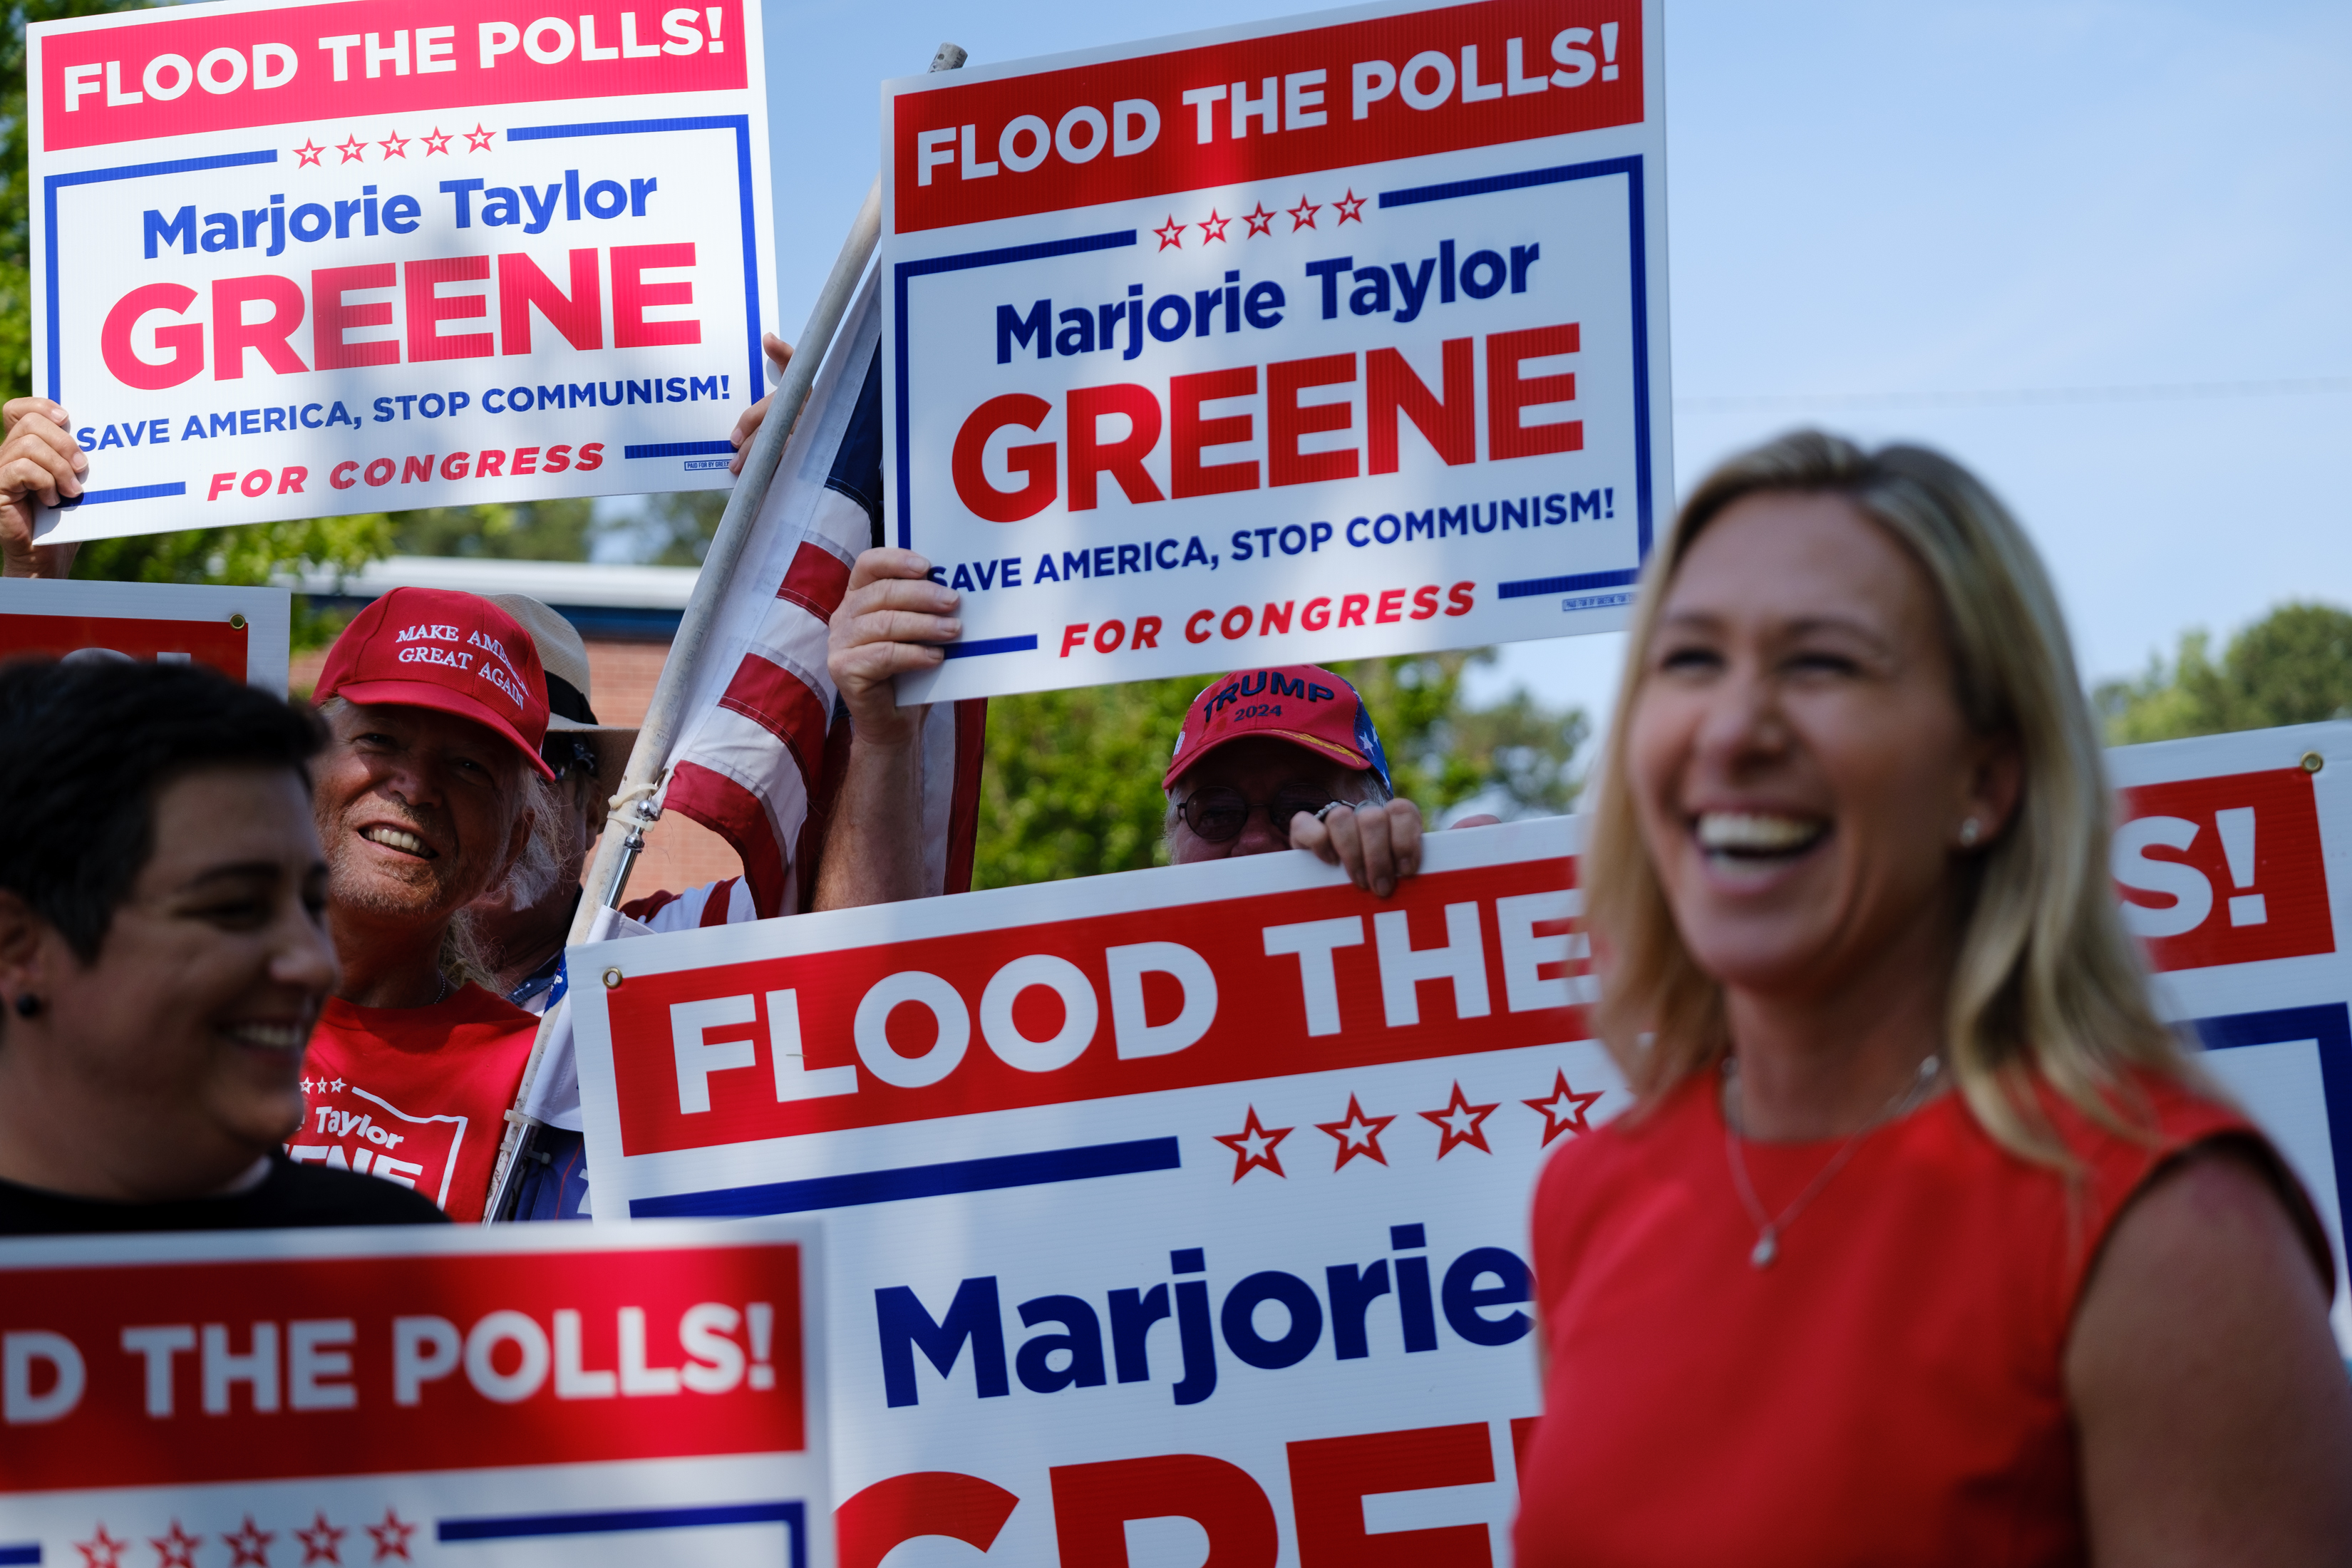 Marjorie Taylor Greene will remain on the ballot in Georgia